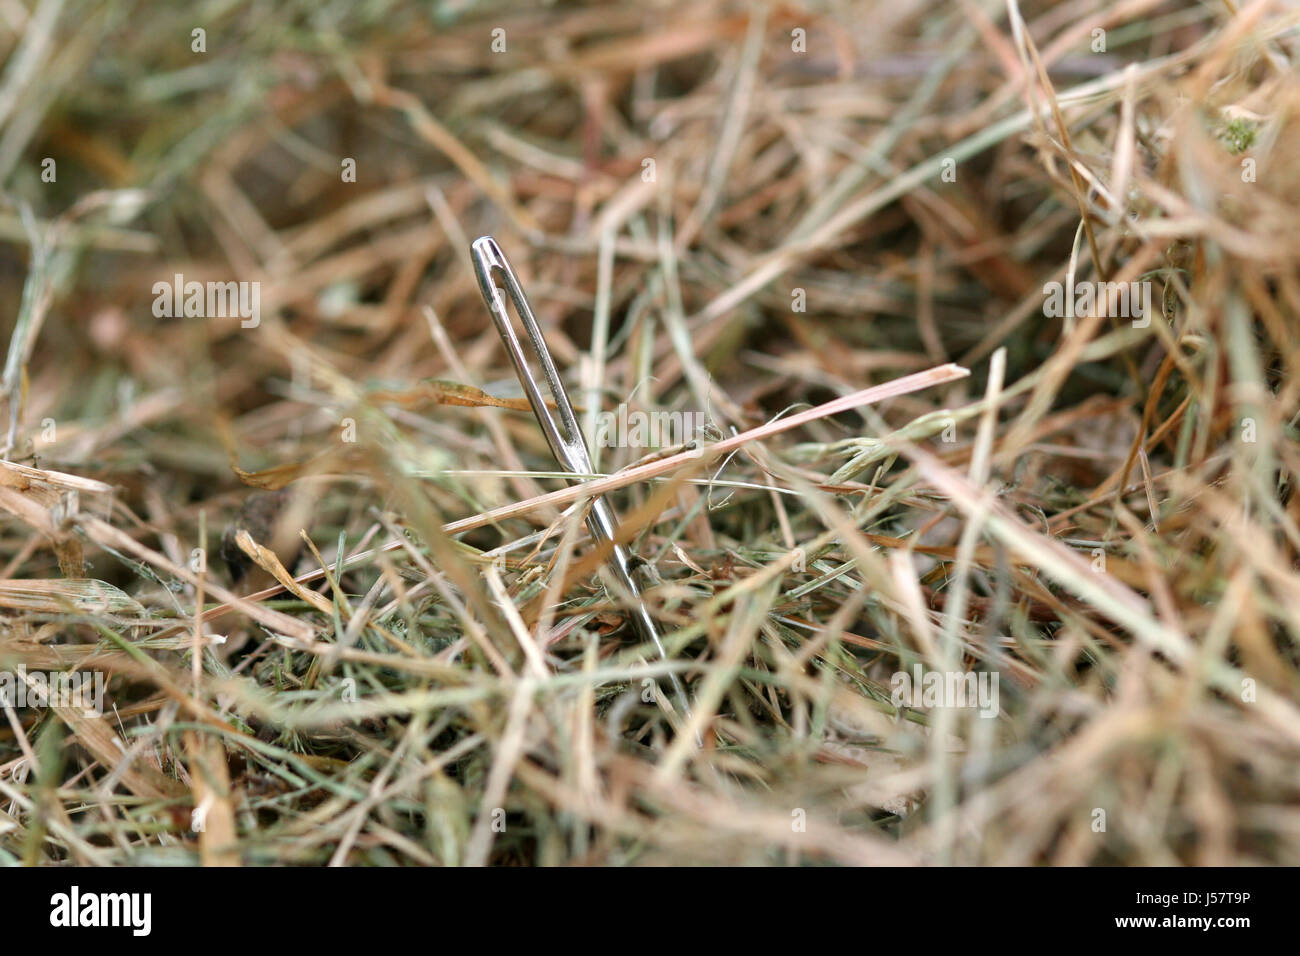 needle in a haystack Stock Photo